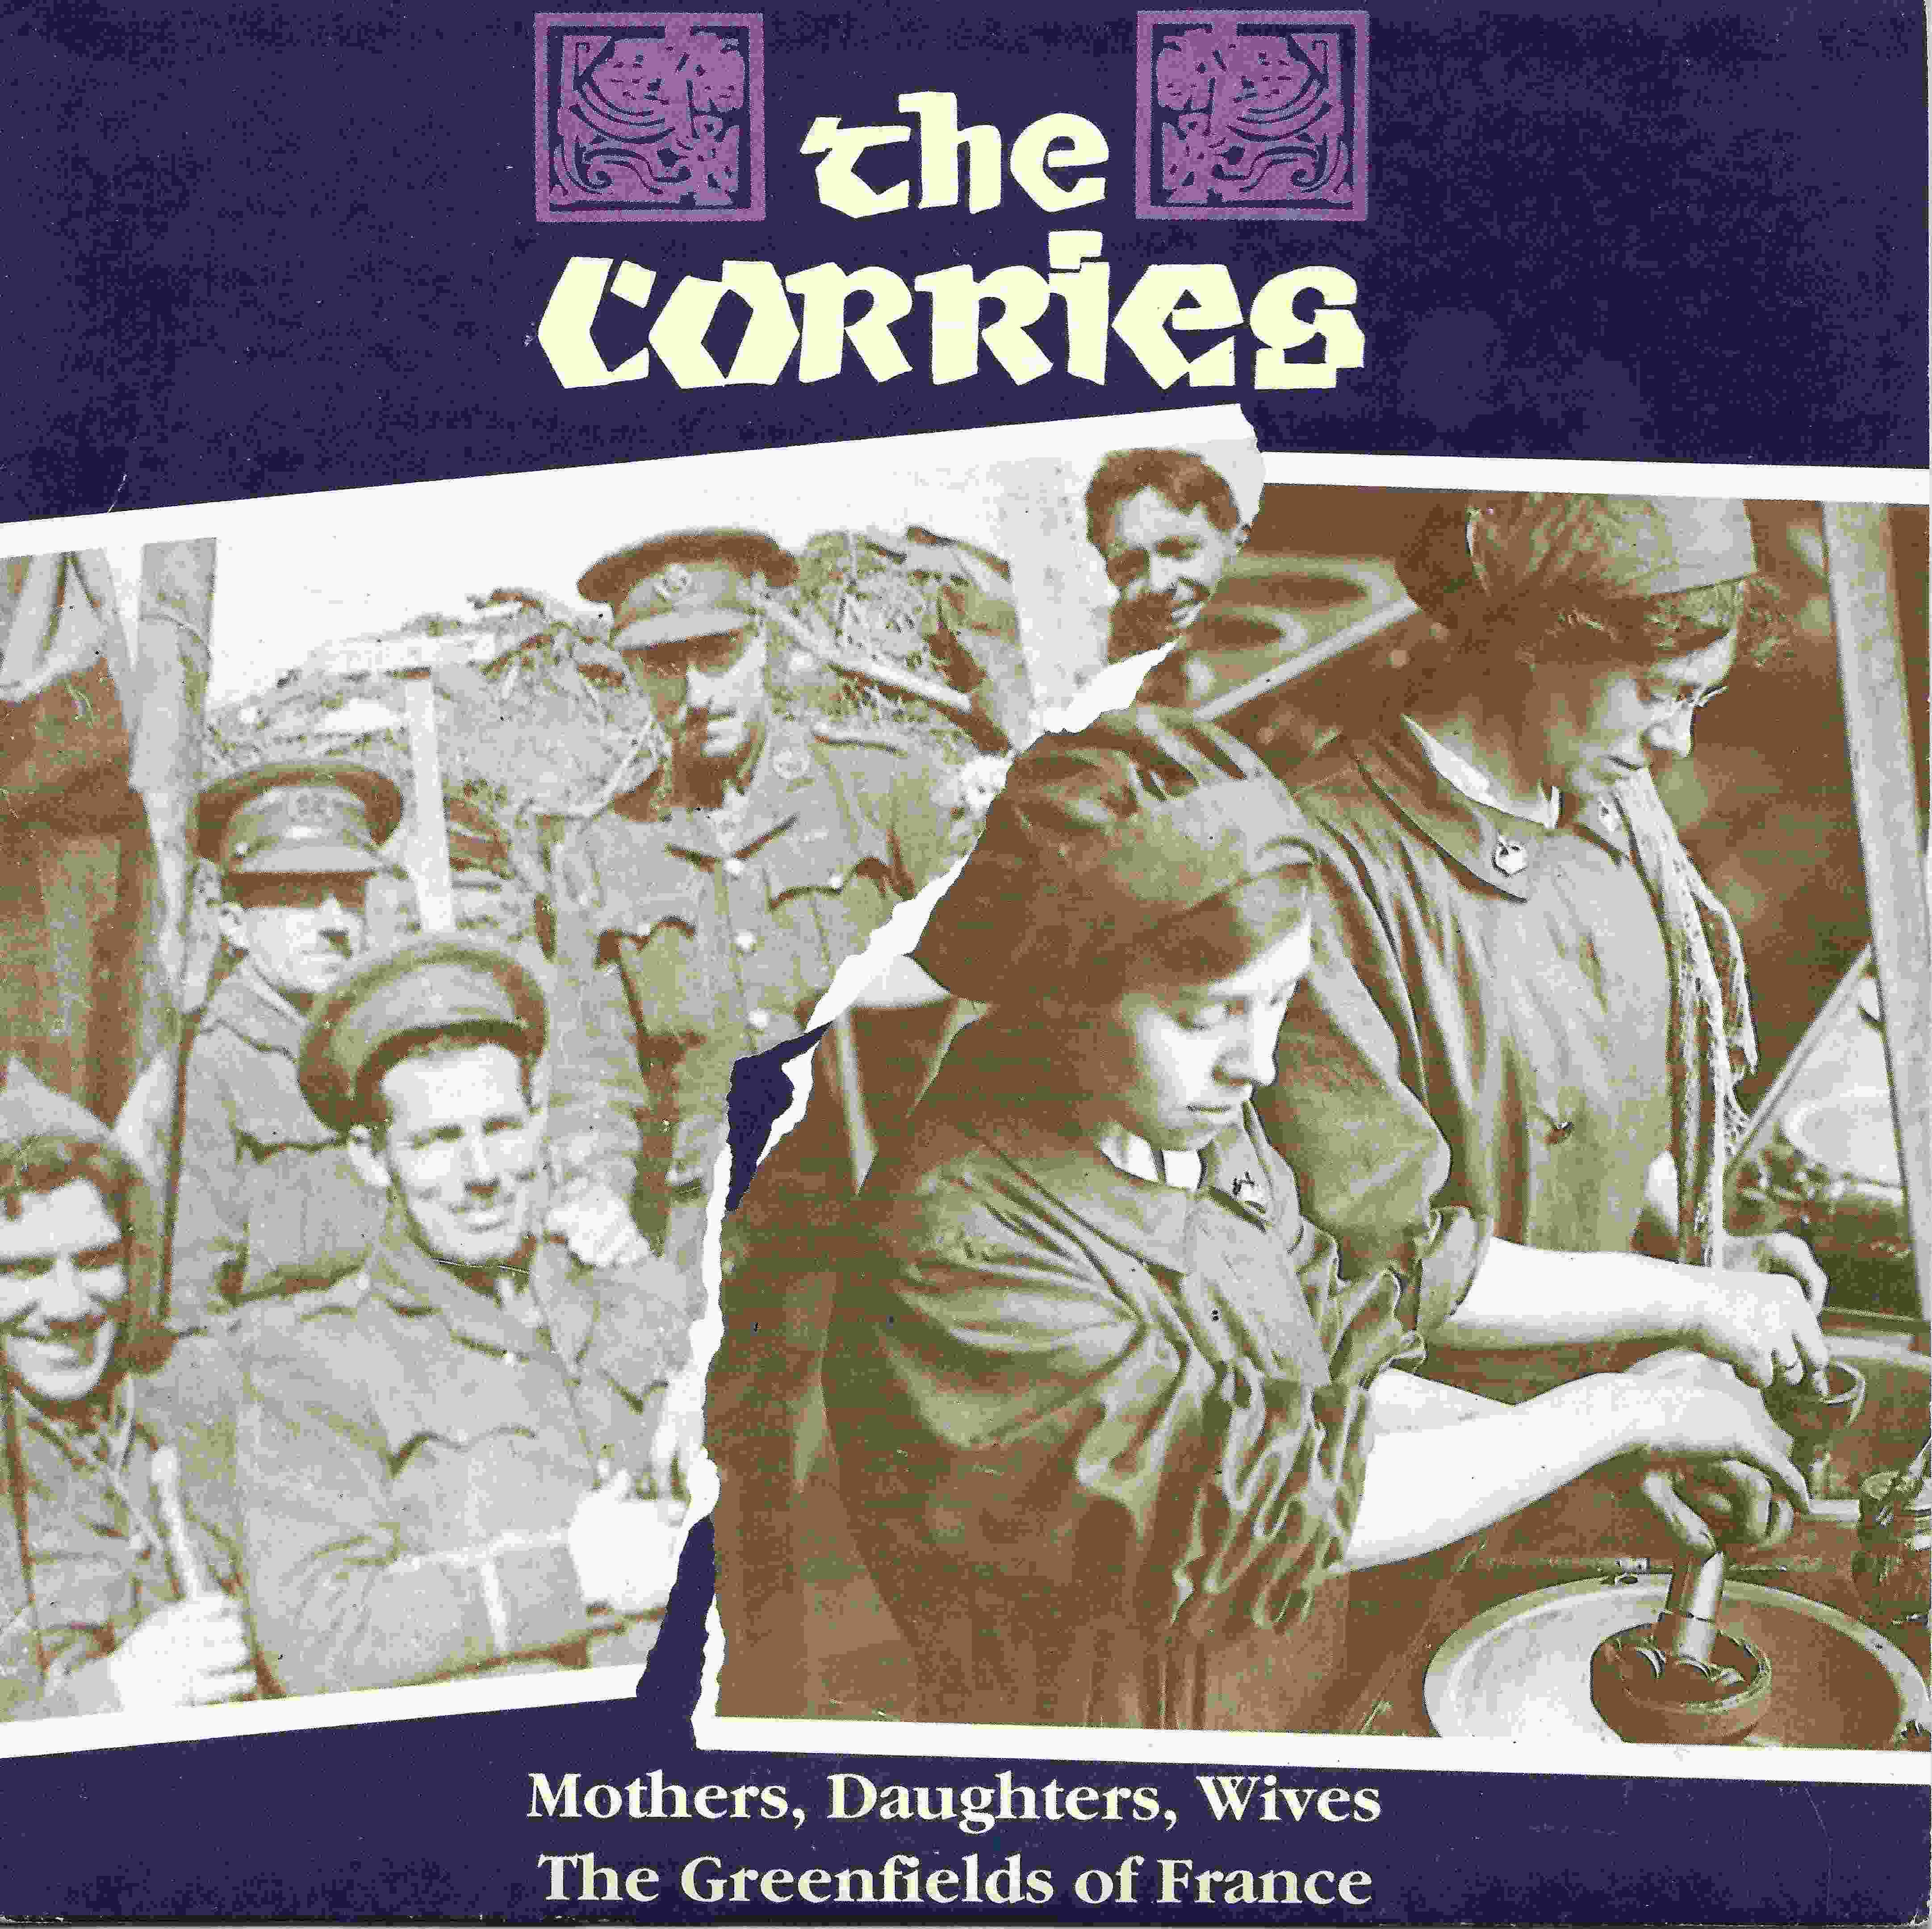 Picture of RESL 819 Mothers, daughters, wives by artist The Corries from the BBC records and Tapes library